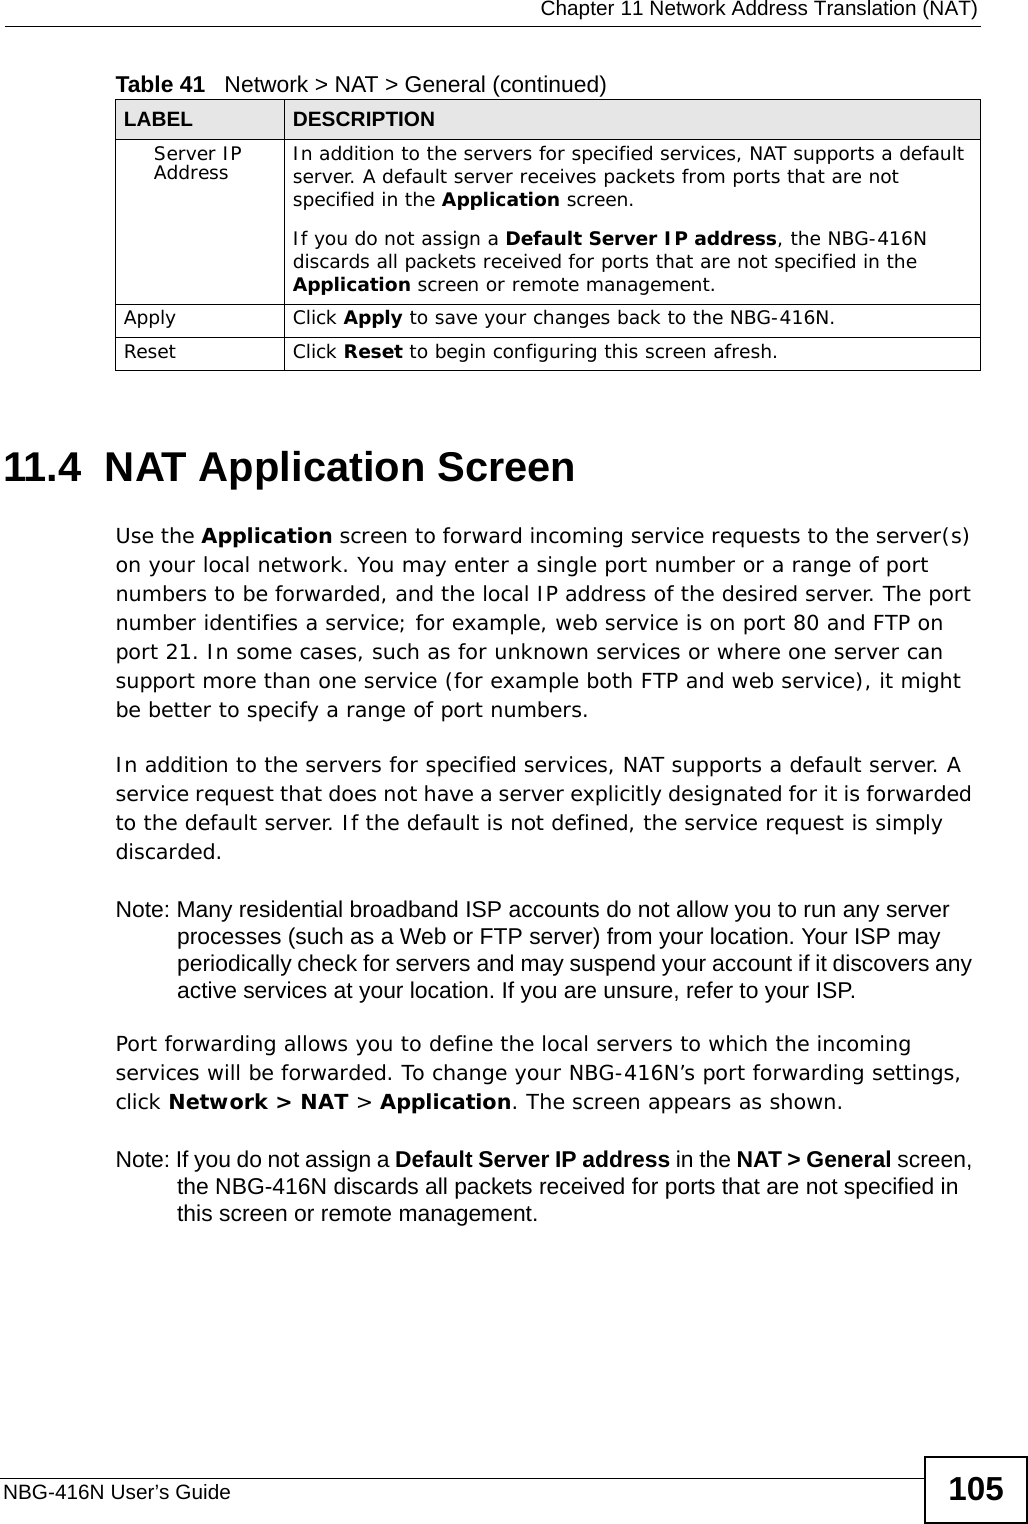  Chapter 11 Network Address Translation (NAT)NBG-416N User’s Guide 10511.4  NAT Application Screen   Use the Application screen to forward incoming service requests to the server(s) on your local network. You may enter a single port number or a range of port numbers to be forwarded, and the local IP address of the desired server. The port number identifies a service; for example, web service is on port 80 and FTP on port 21. In some cases, such as for unknown services or where one server can support more than one service (for example both FTP and web service), it might be better to specify a range of port numbers.In addition to the servers for specified services, NAT supports a default server. A service request that does not have a server explicitly designated for it is forwarded to the default server. If the default is not defined, the service request is simply discarded.Note: Many residential broadband ISP accounts do not allow you to run any server processes (such as a Web or FTP server) from your location. Your ISP may periodically check for servers and may suspend your account if it discovers any active services at your location. If you are unsure, refer to your ISP.Port forwarding allows you to define the local servers to which the incoming services will be forwarded. To change your NBG-416N’s port forwarding settings, click Network &gt; NAT &gt; Application. The screen appears as shown.Note: If you do not assign a Default Server IP address in the NAT &gt; General screen, the NBG-416N discards all packets received for ports that are not specified in this screen or remote management.Server IP Address In addition to the servers for specified services, NAT supports a default server. A default server receives packets from ports that are not specified in the Application screen. If you do not assign a Default Server IP address, the NBG-416N discards all packets received for ports that are not specified in the Application screen or remote management.Apply Click Apply to save your changes back to the NBG-416N.Reset Click Reset to begin configuring this screen afresh.Table 41   Network &gt; NAT &gt; General (continued)LABEL DESCRIPTION